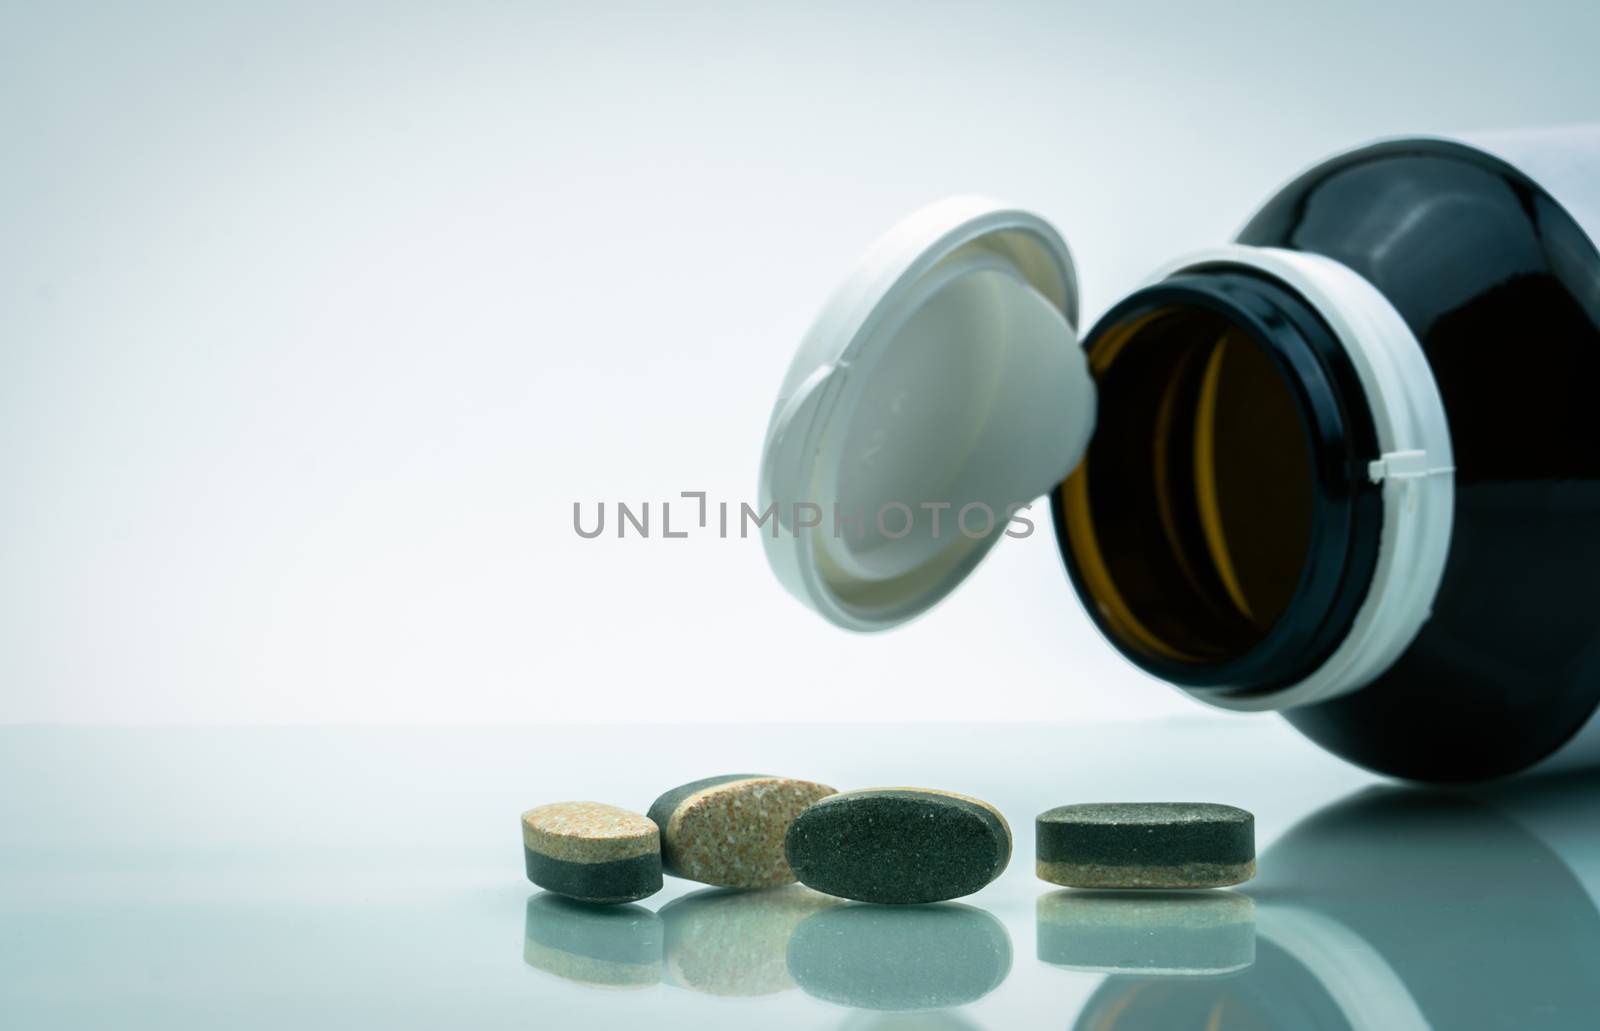 Essential Vitamins and minerals supplements dual layer tablet pills and medicine glass bottle with open cap isolated on white background with copy space. Use for vitamins and supplements advertising.